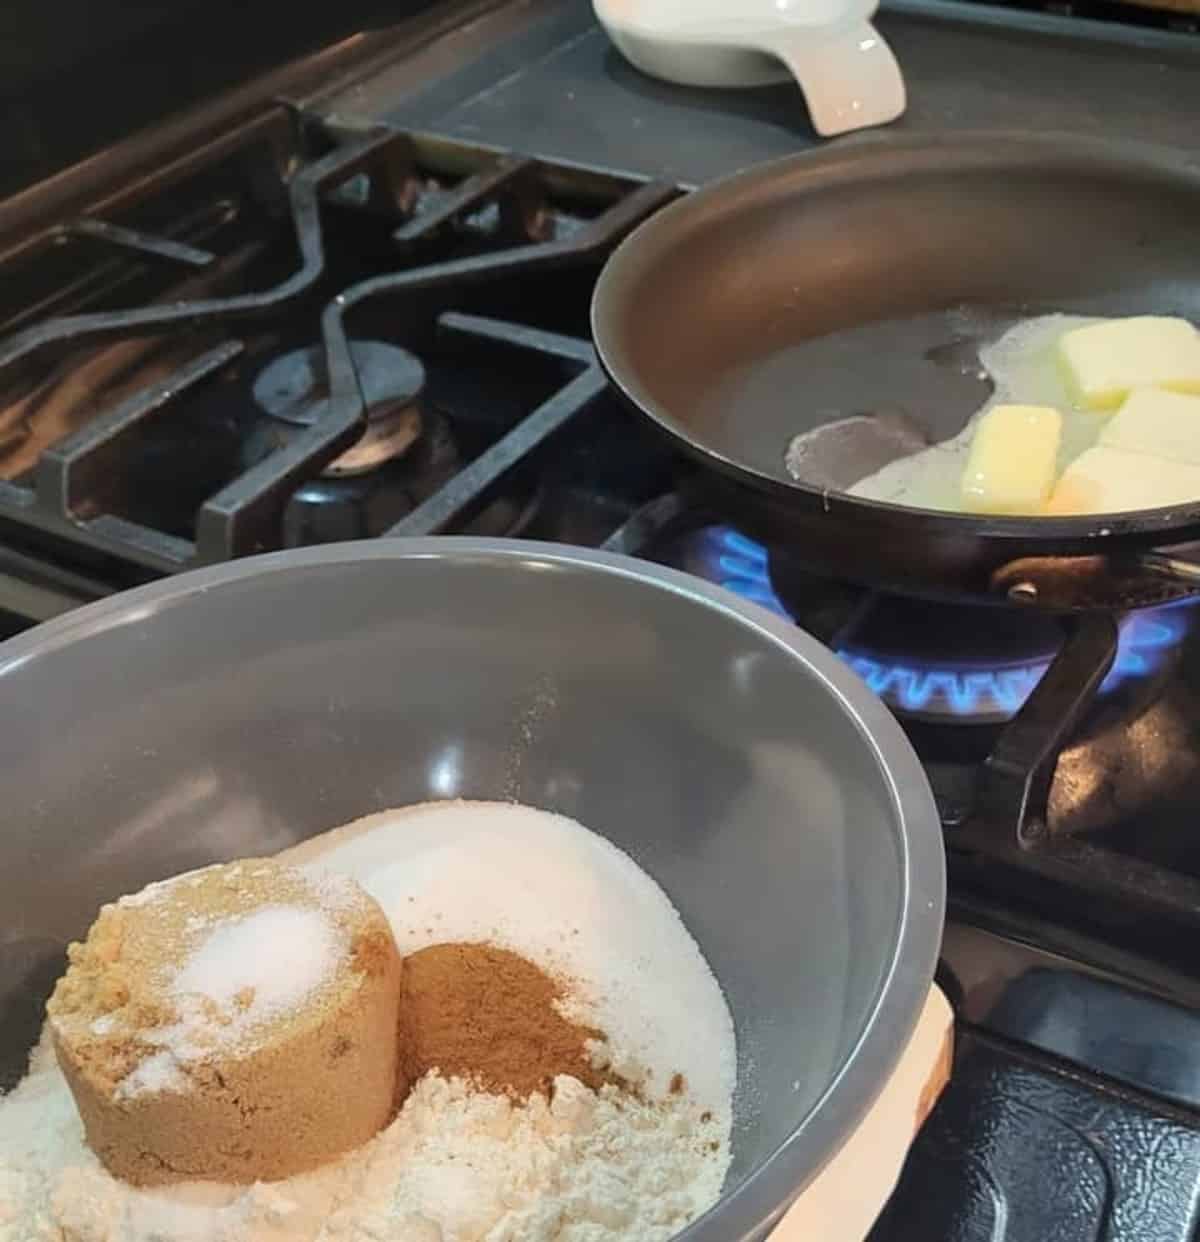 mixing bowl with dry ingredients un mixed shown in foreground, background showing a skillet over flame on stove, melting whole butter